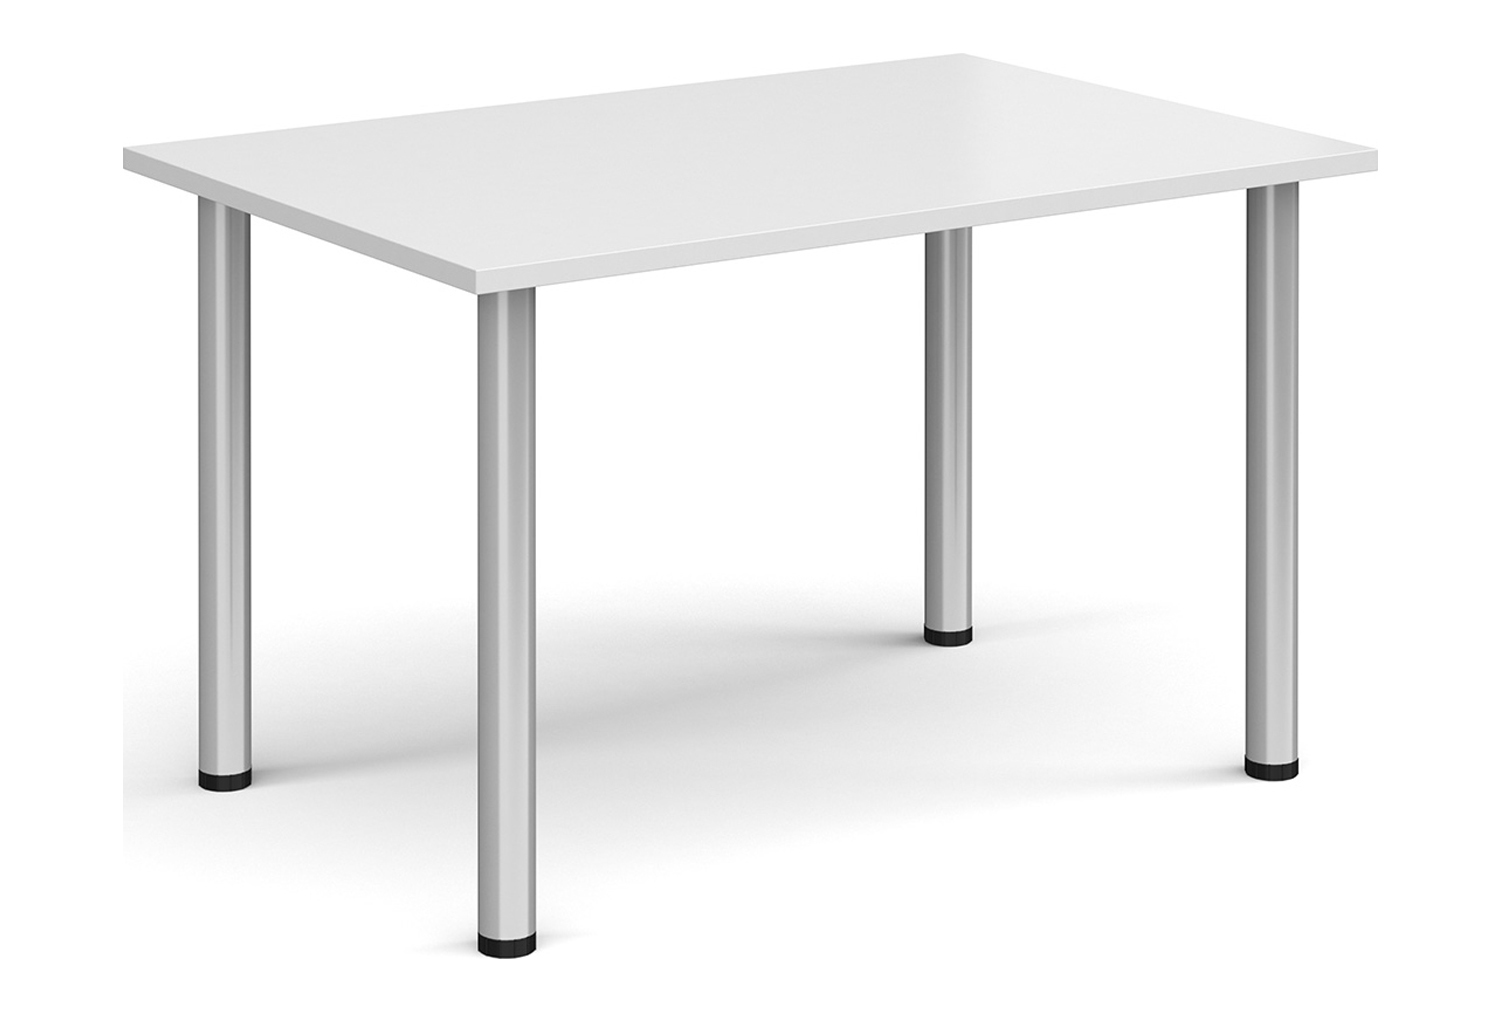 Pallas Rectangular Meeting Table, 120wx80dx73h (cm), Silver Frame, White, Express Delivery